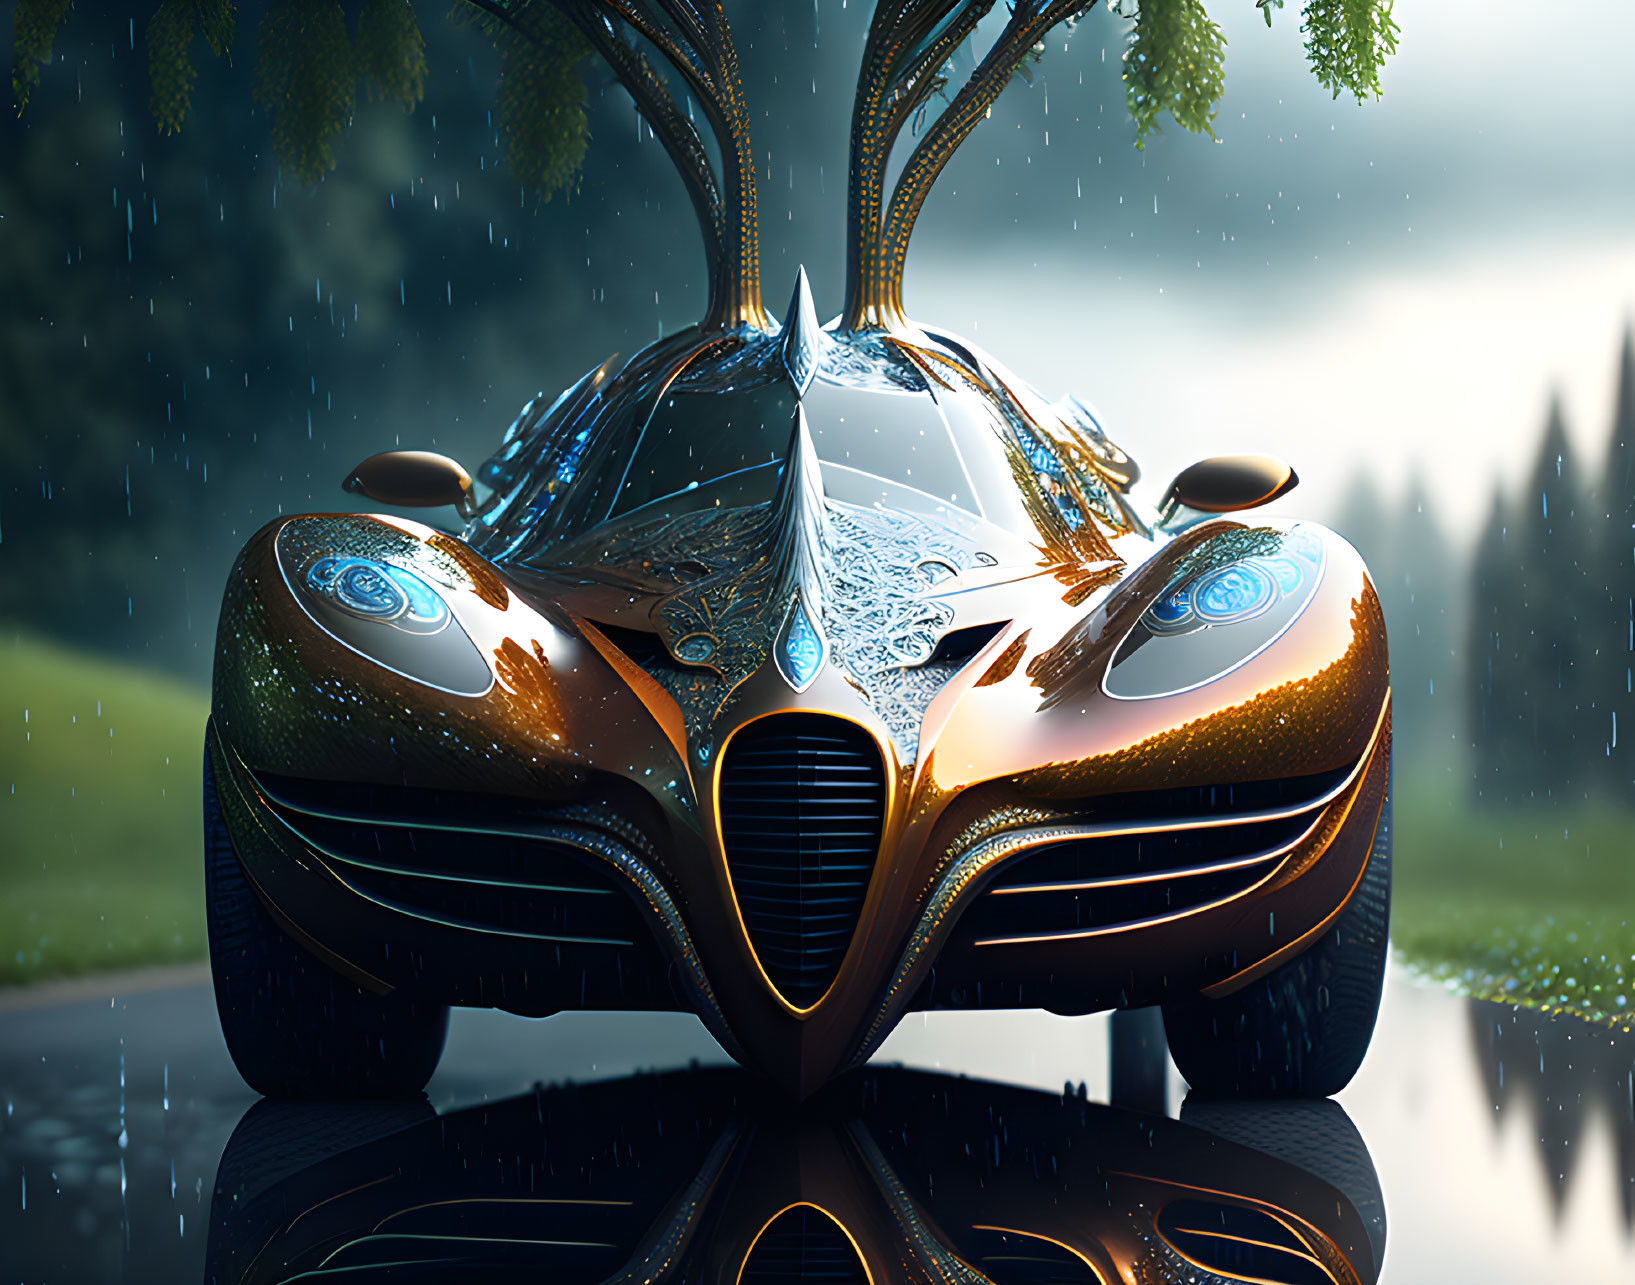 Futuristic Car with Illuminated Patterns in Rainy Forest Setting